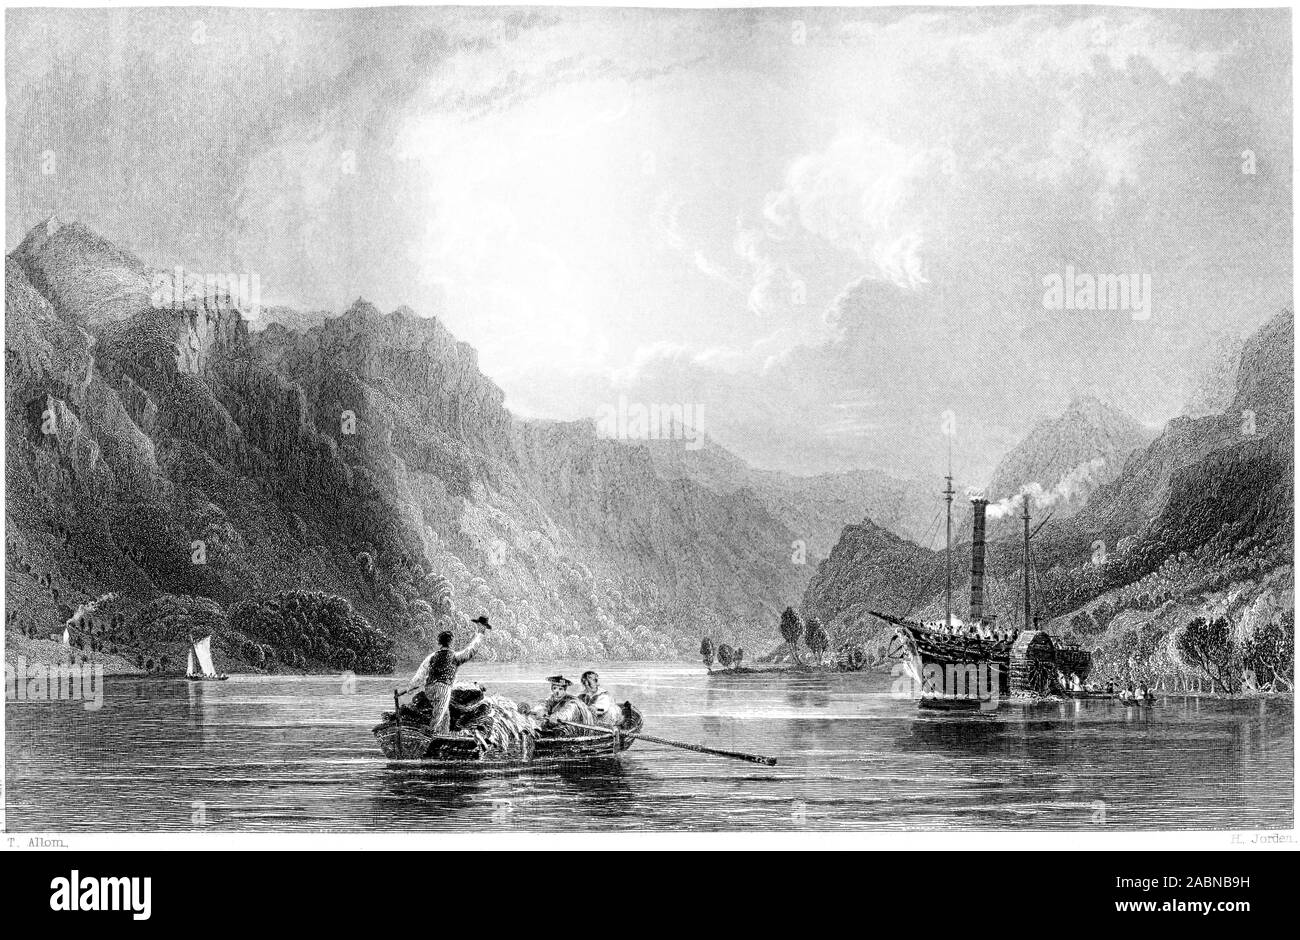 An engraving of The Head of Loch Lomond, looking South scanned at high resolution from a book printed in 1859.  Believed copyright free. Stock Photo